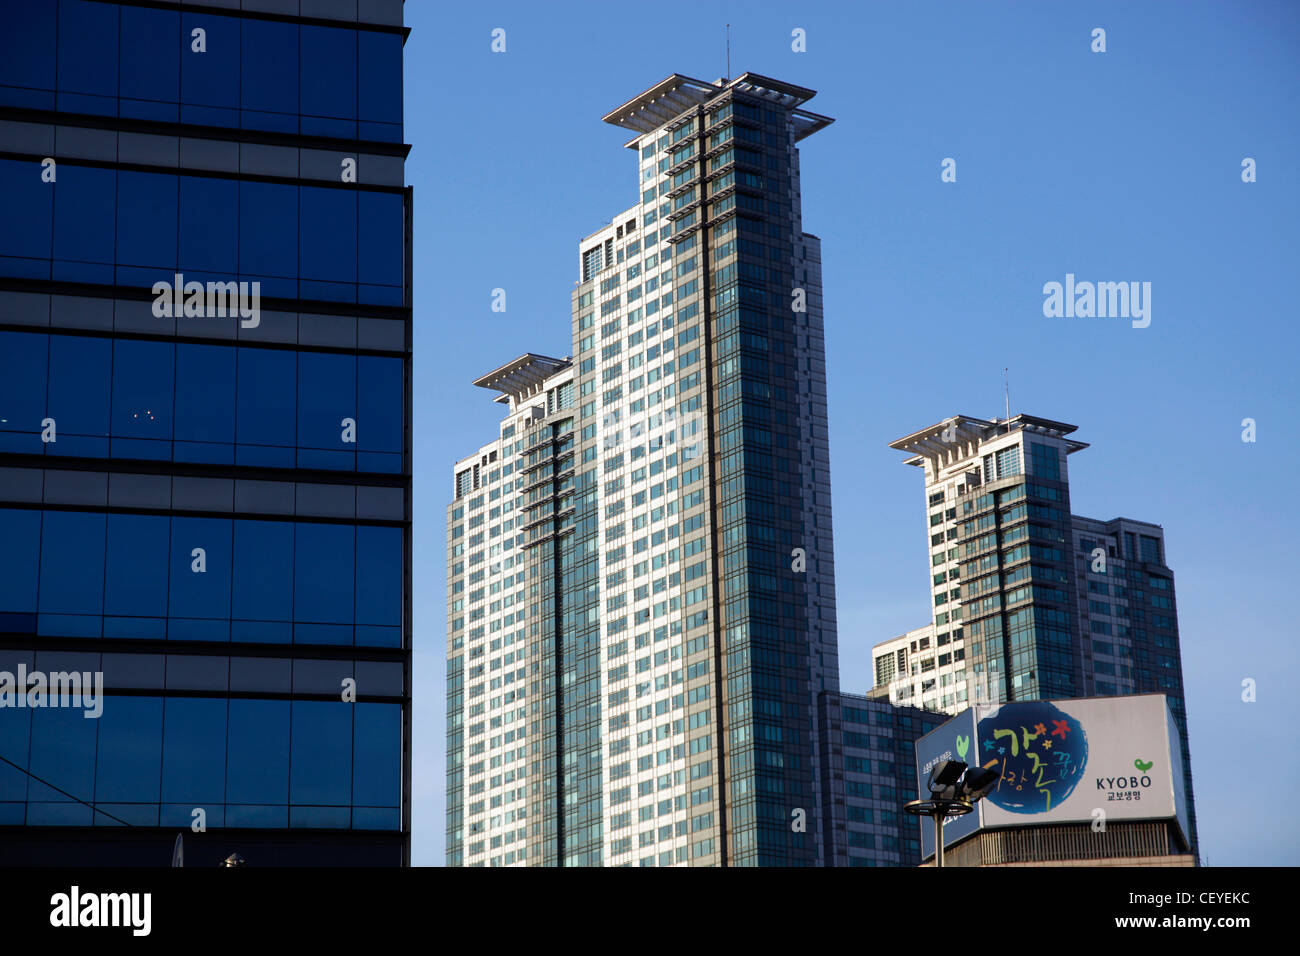 High rise flats and apartment buildings in Seoul, South Korea Stock Photo